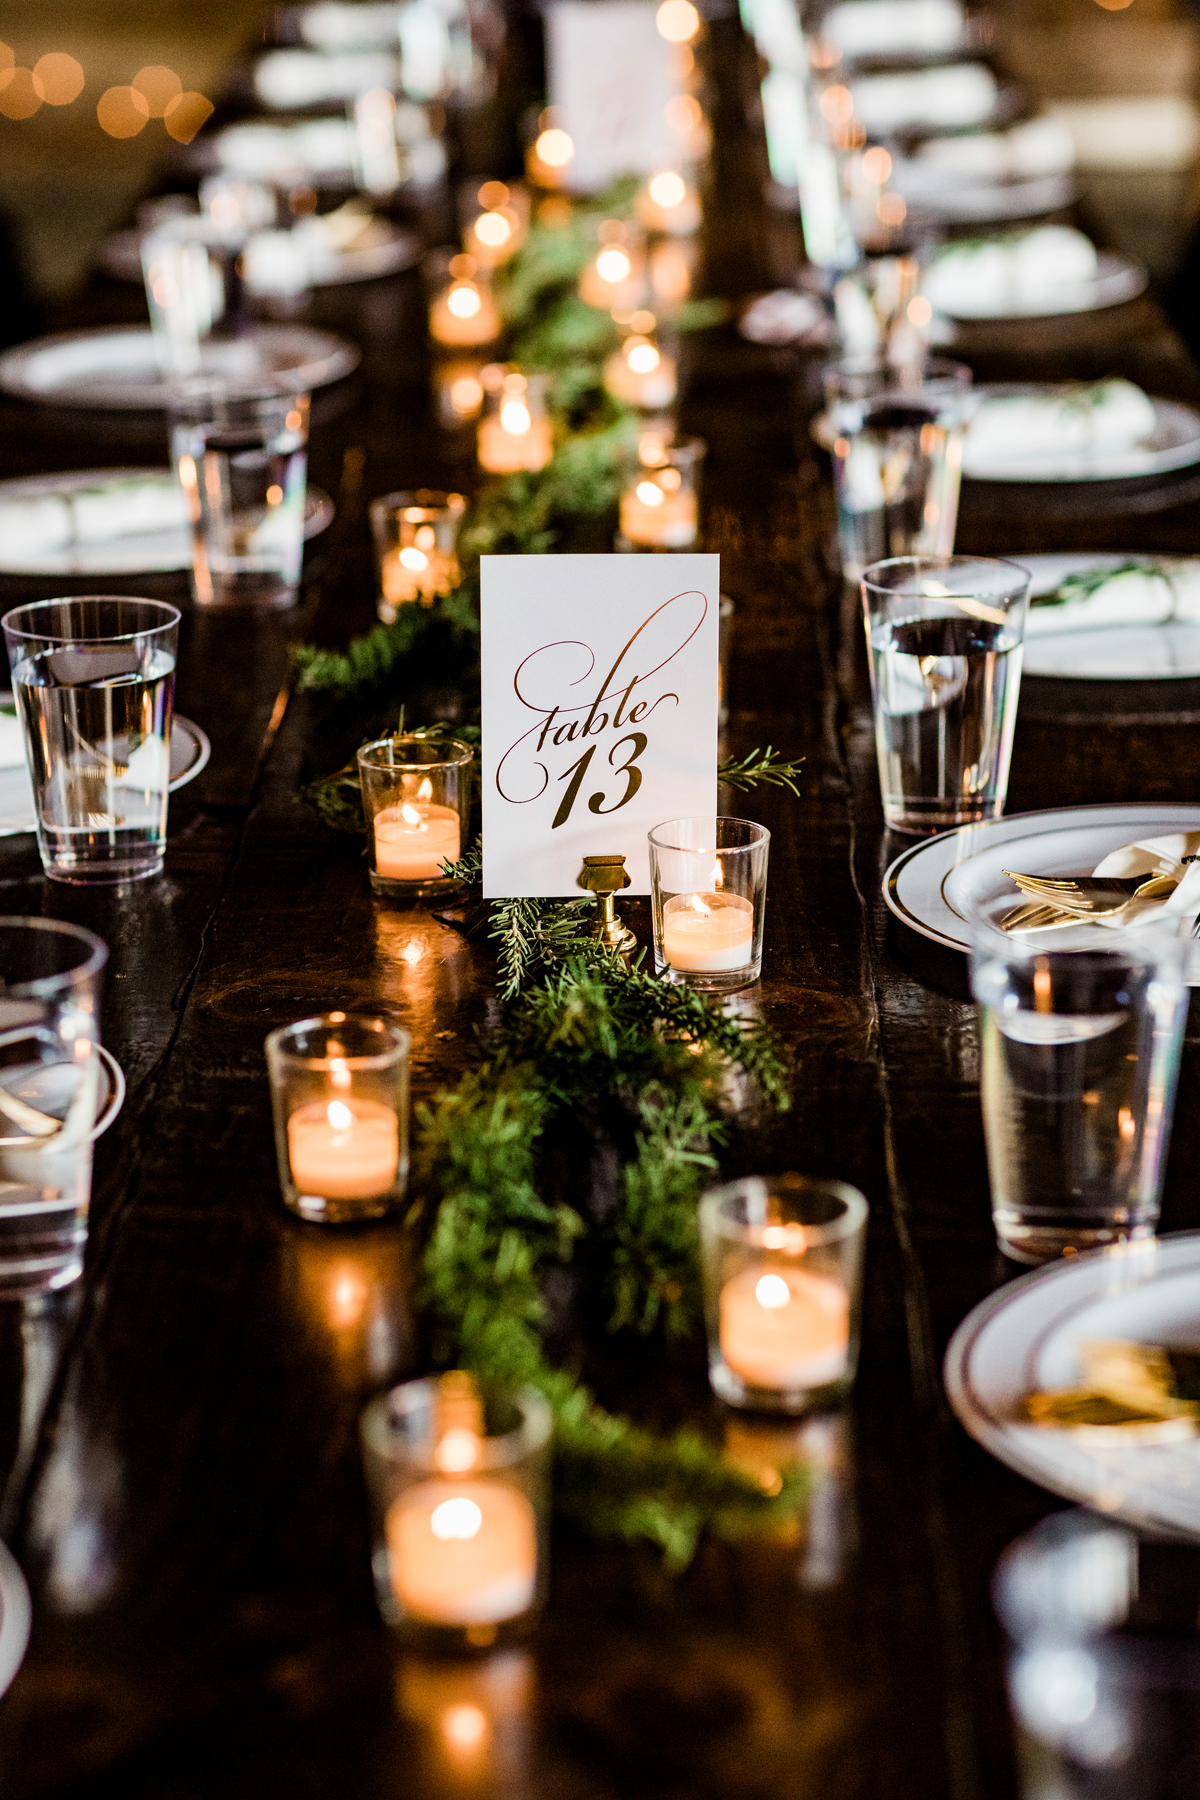   DO: More candles over more flowers. Flower costs can add up very fast. Candles are more affordable, they create such a cozy environment, and you can resell the votives after the wedding.  